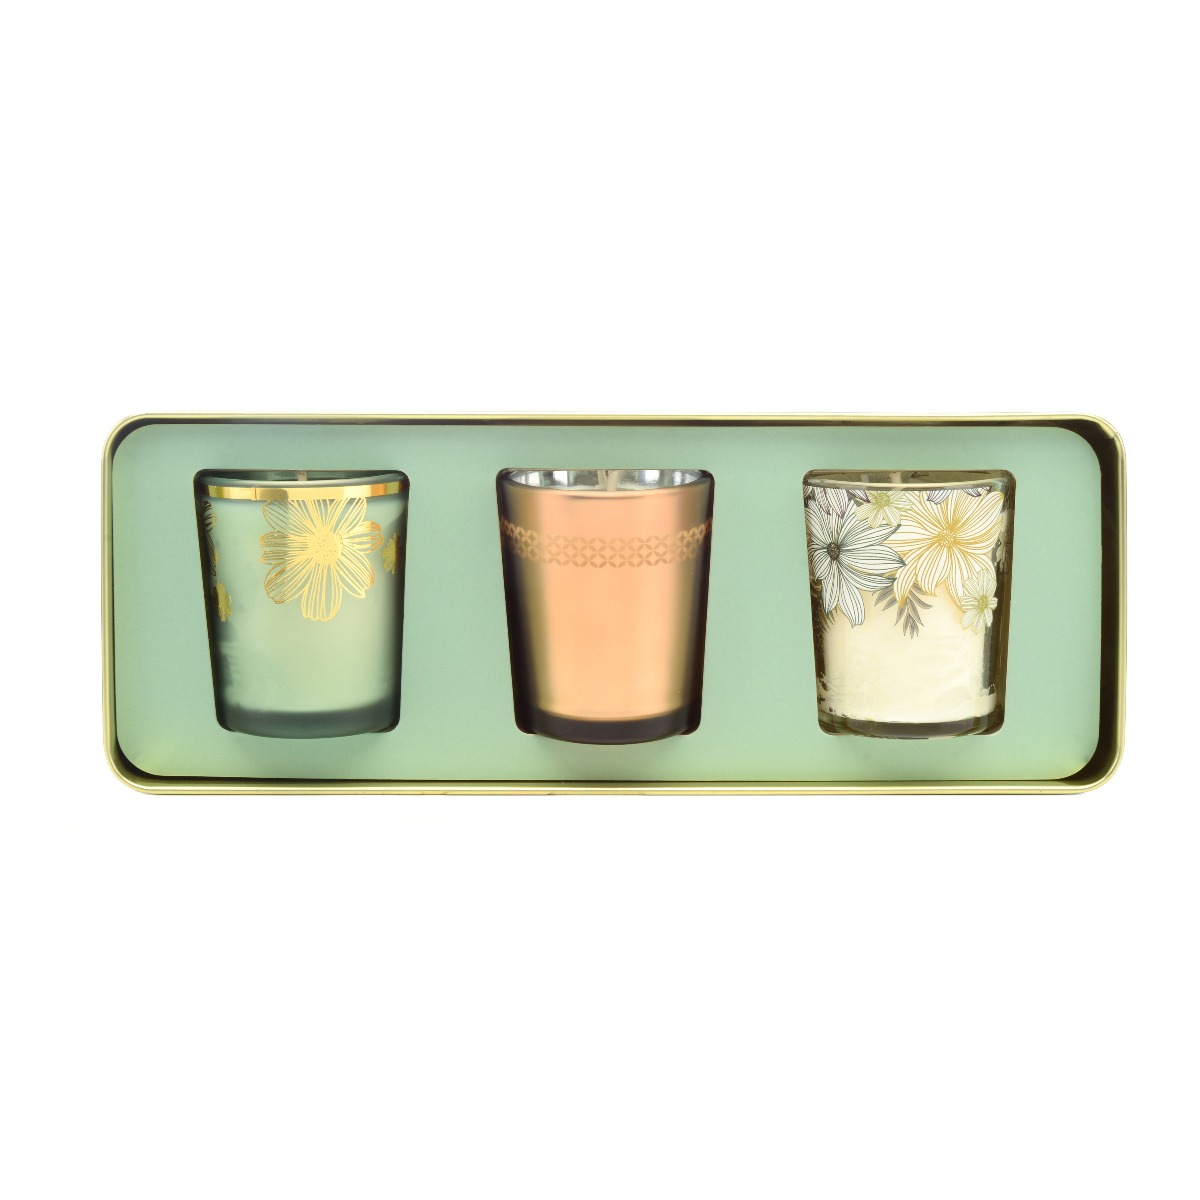 Atrium Scented Candle Gift Set image number null